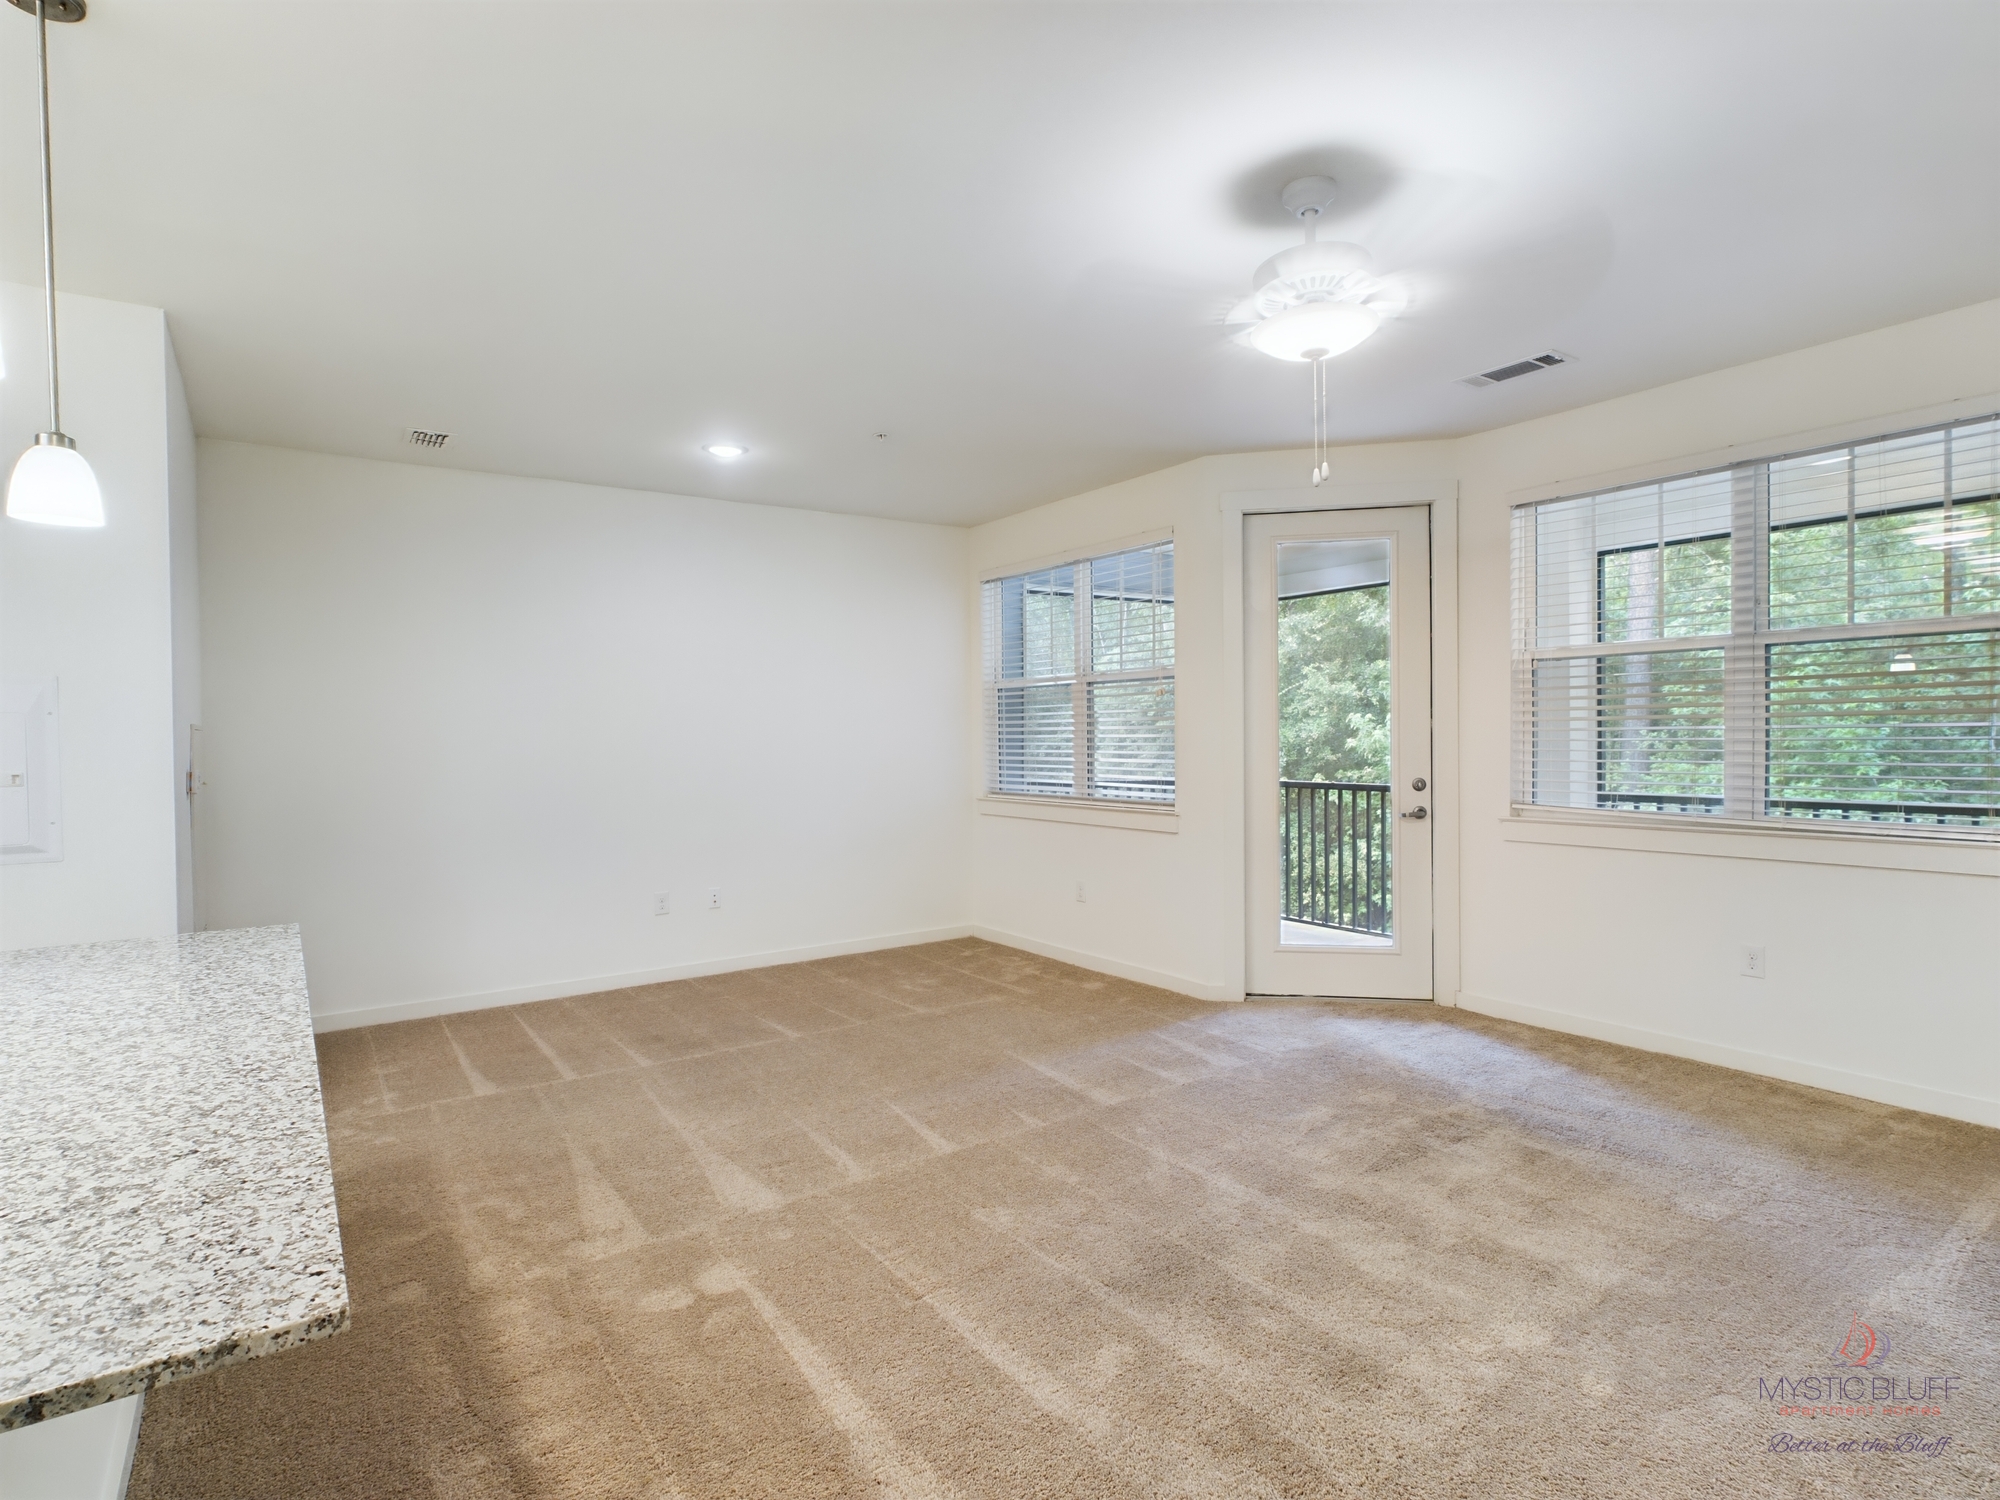 An empty living room in an apartment with a ceiling fan and carpet.